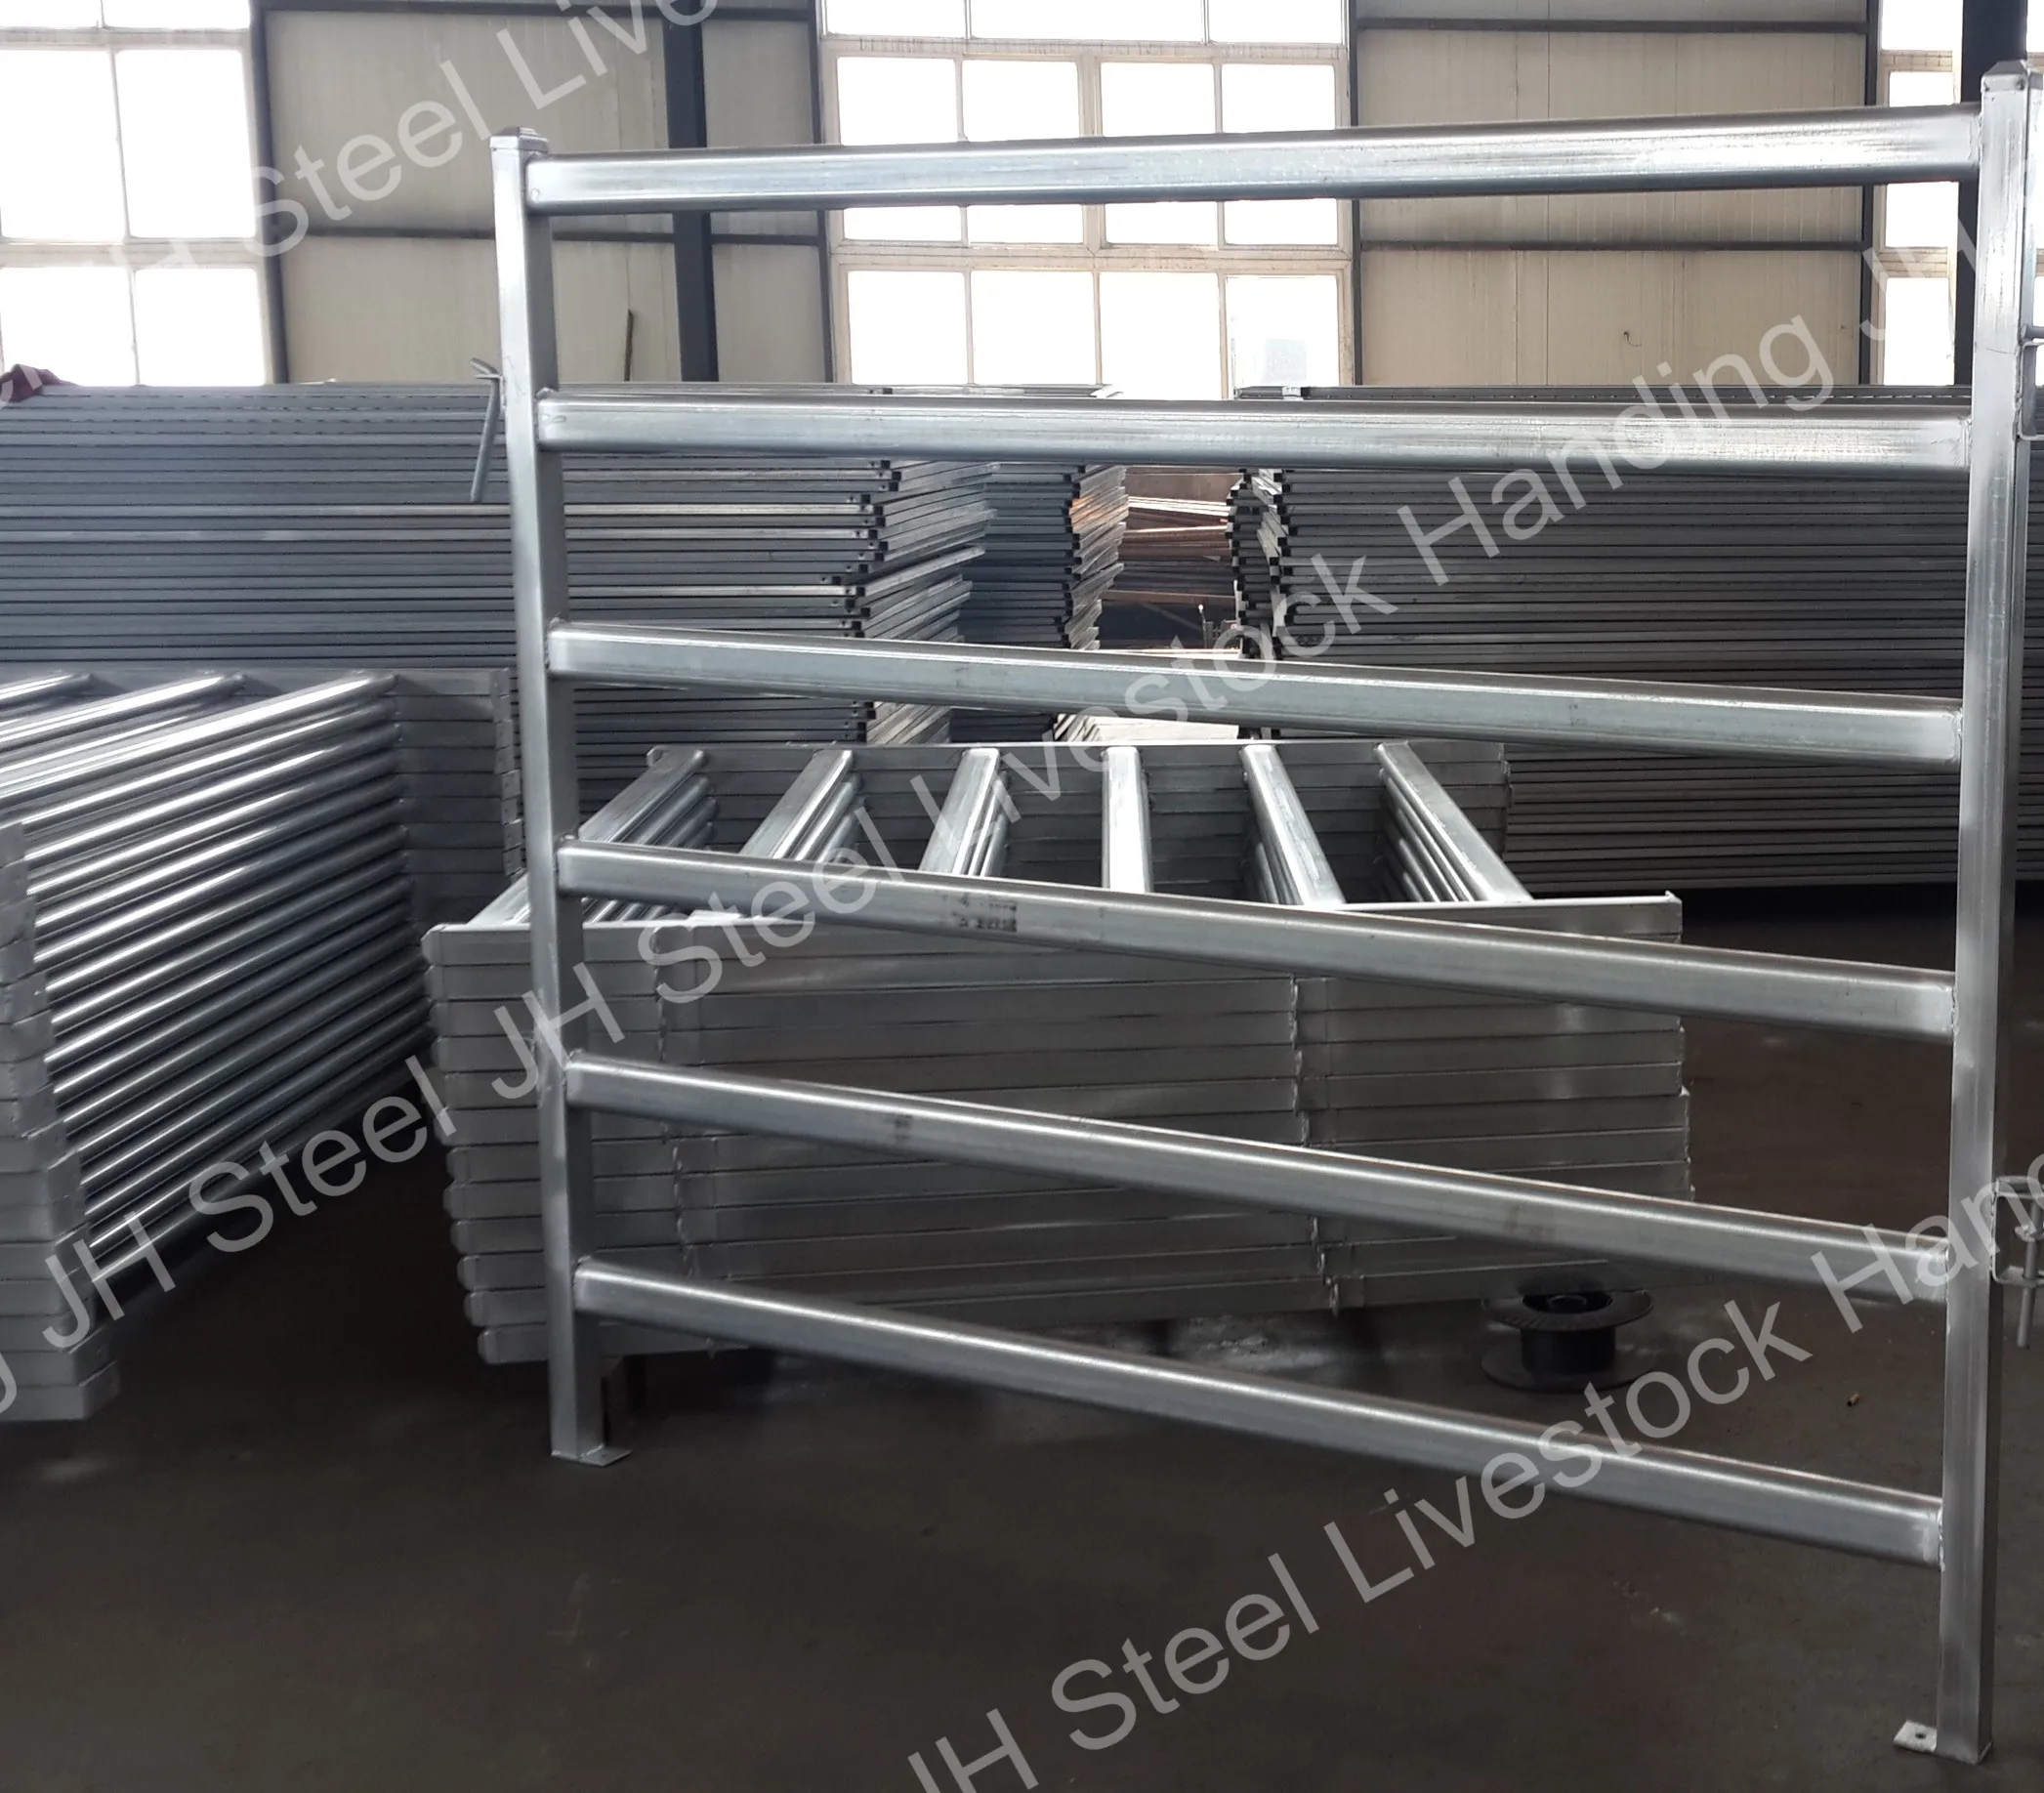 

Outdoor Durable Portable Stainless Galvanized Horse/Sheep/Cattle Livestock Farm Fence Panel